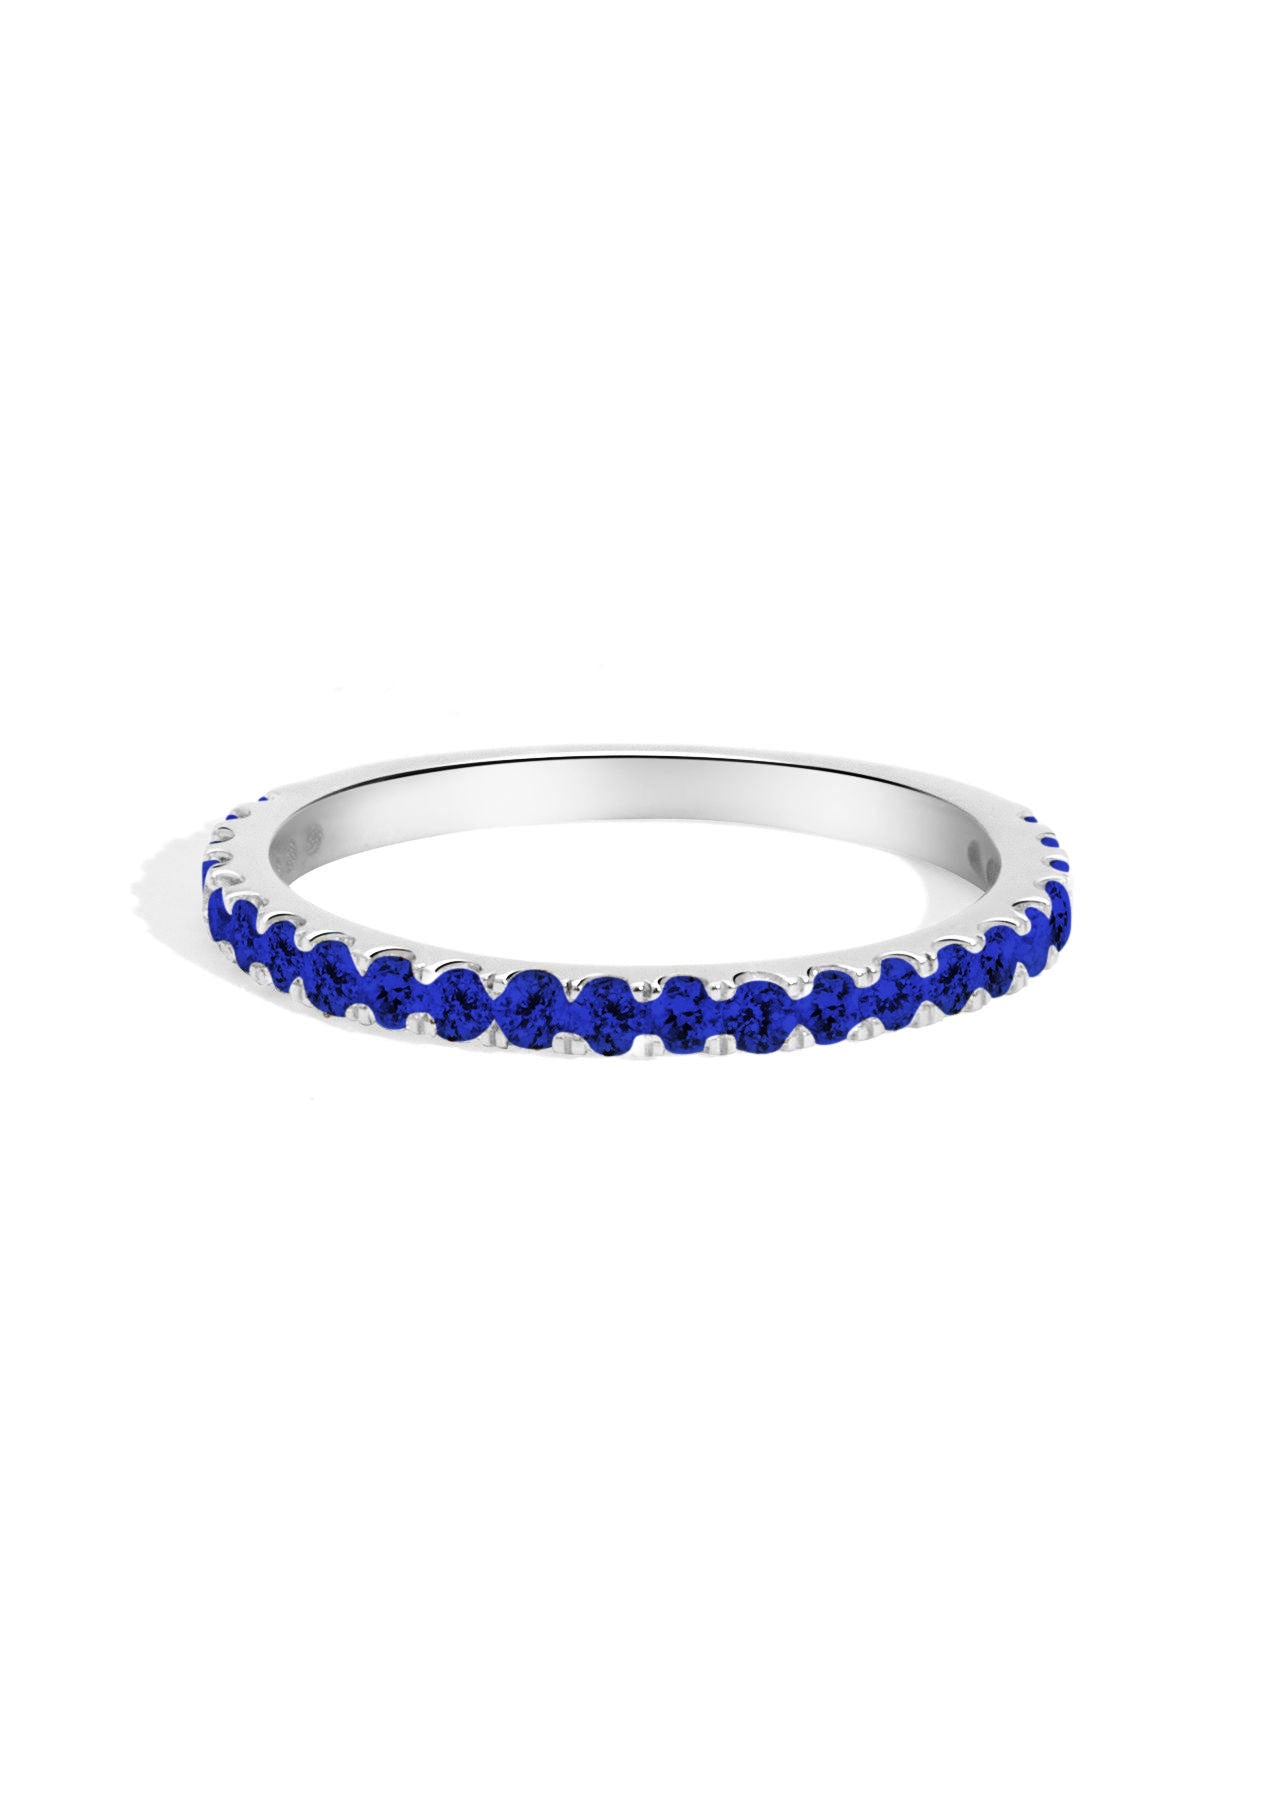 The Halo White Gold Sapphire Band